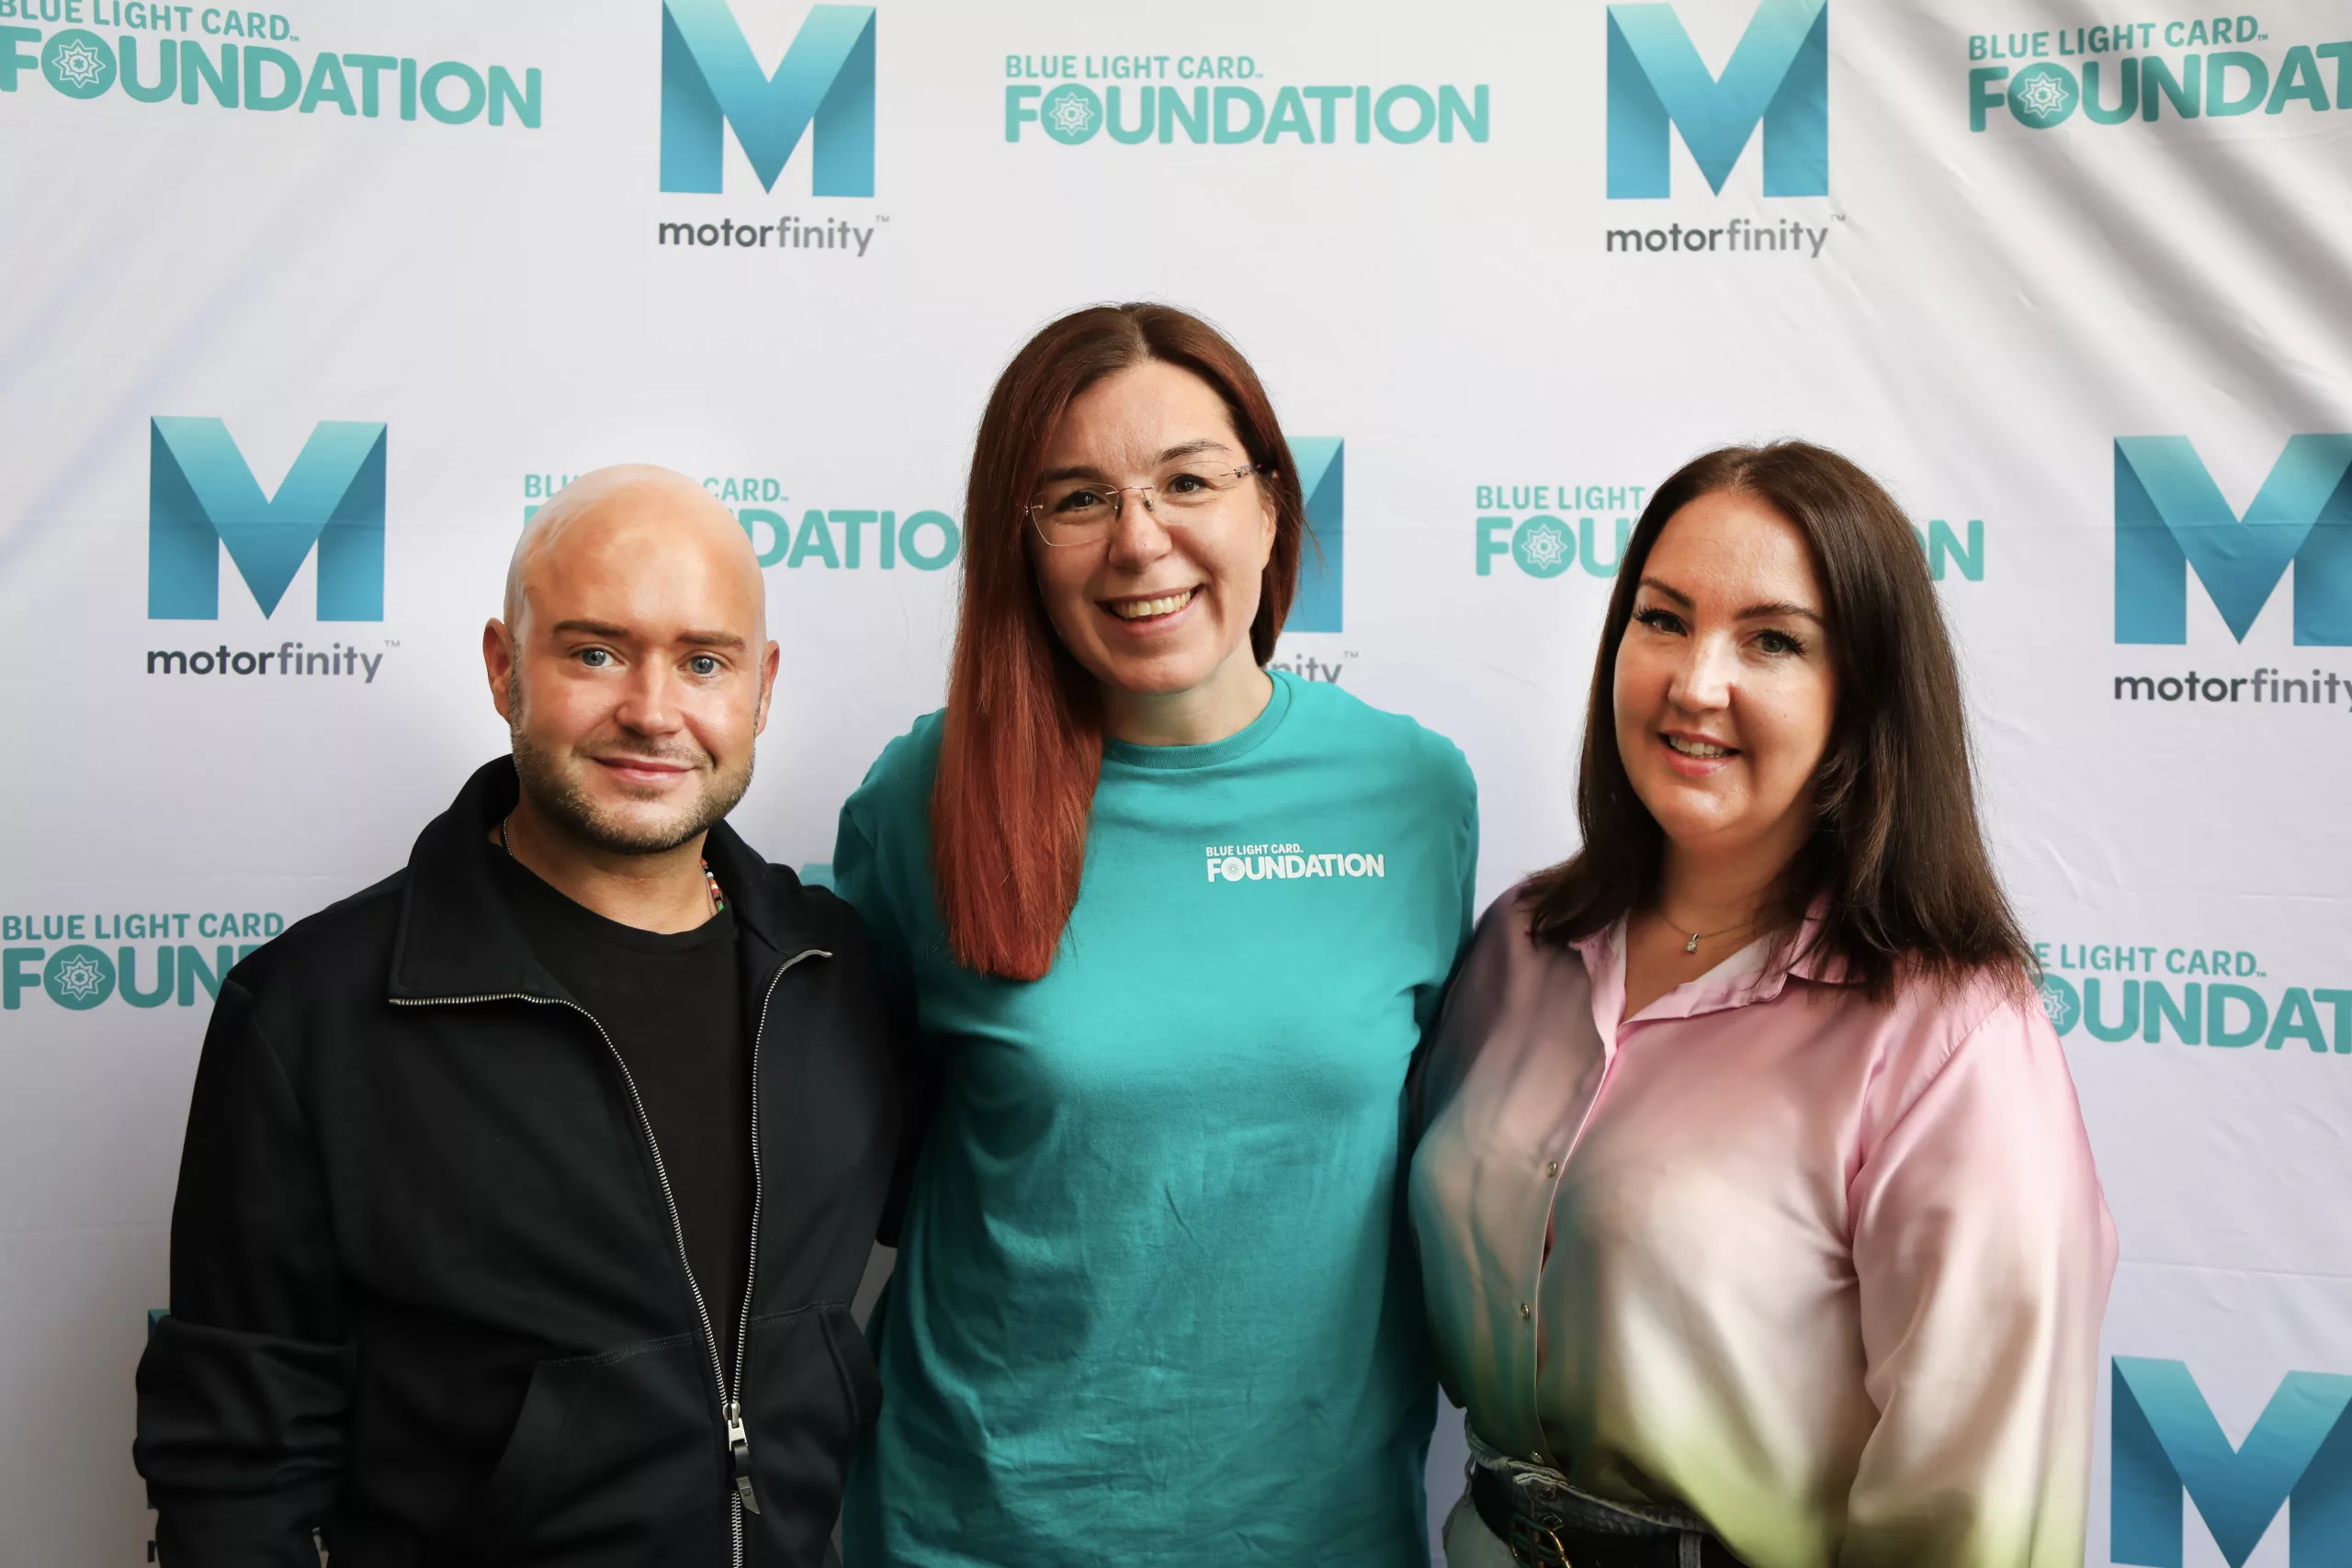 A picture of two Motorfinity staff and Blue Light Card Foundation's fundraising manager. They are standing in front of a backdrop showing both logos.